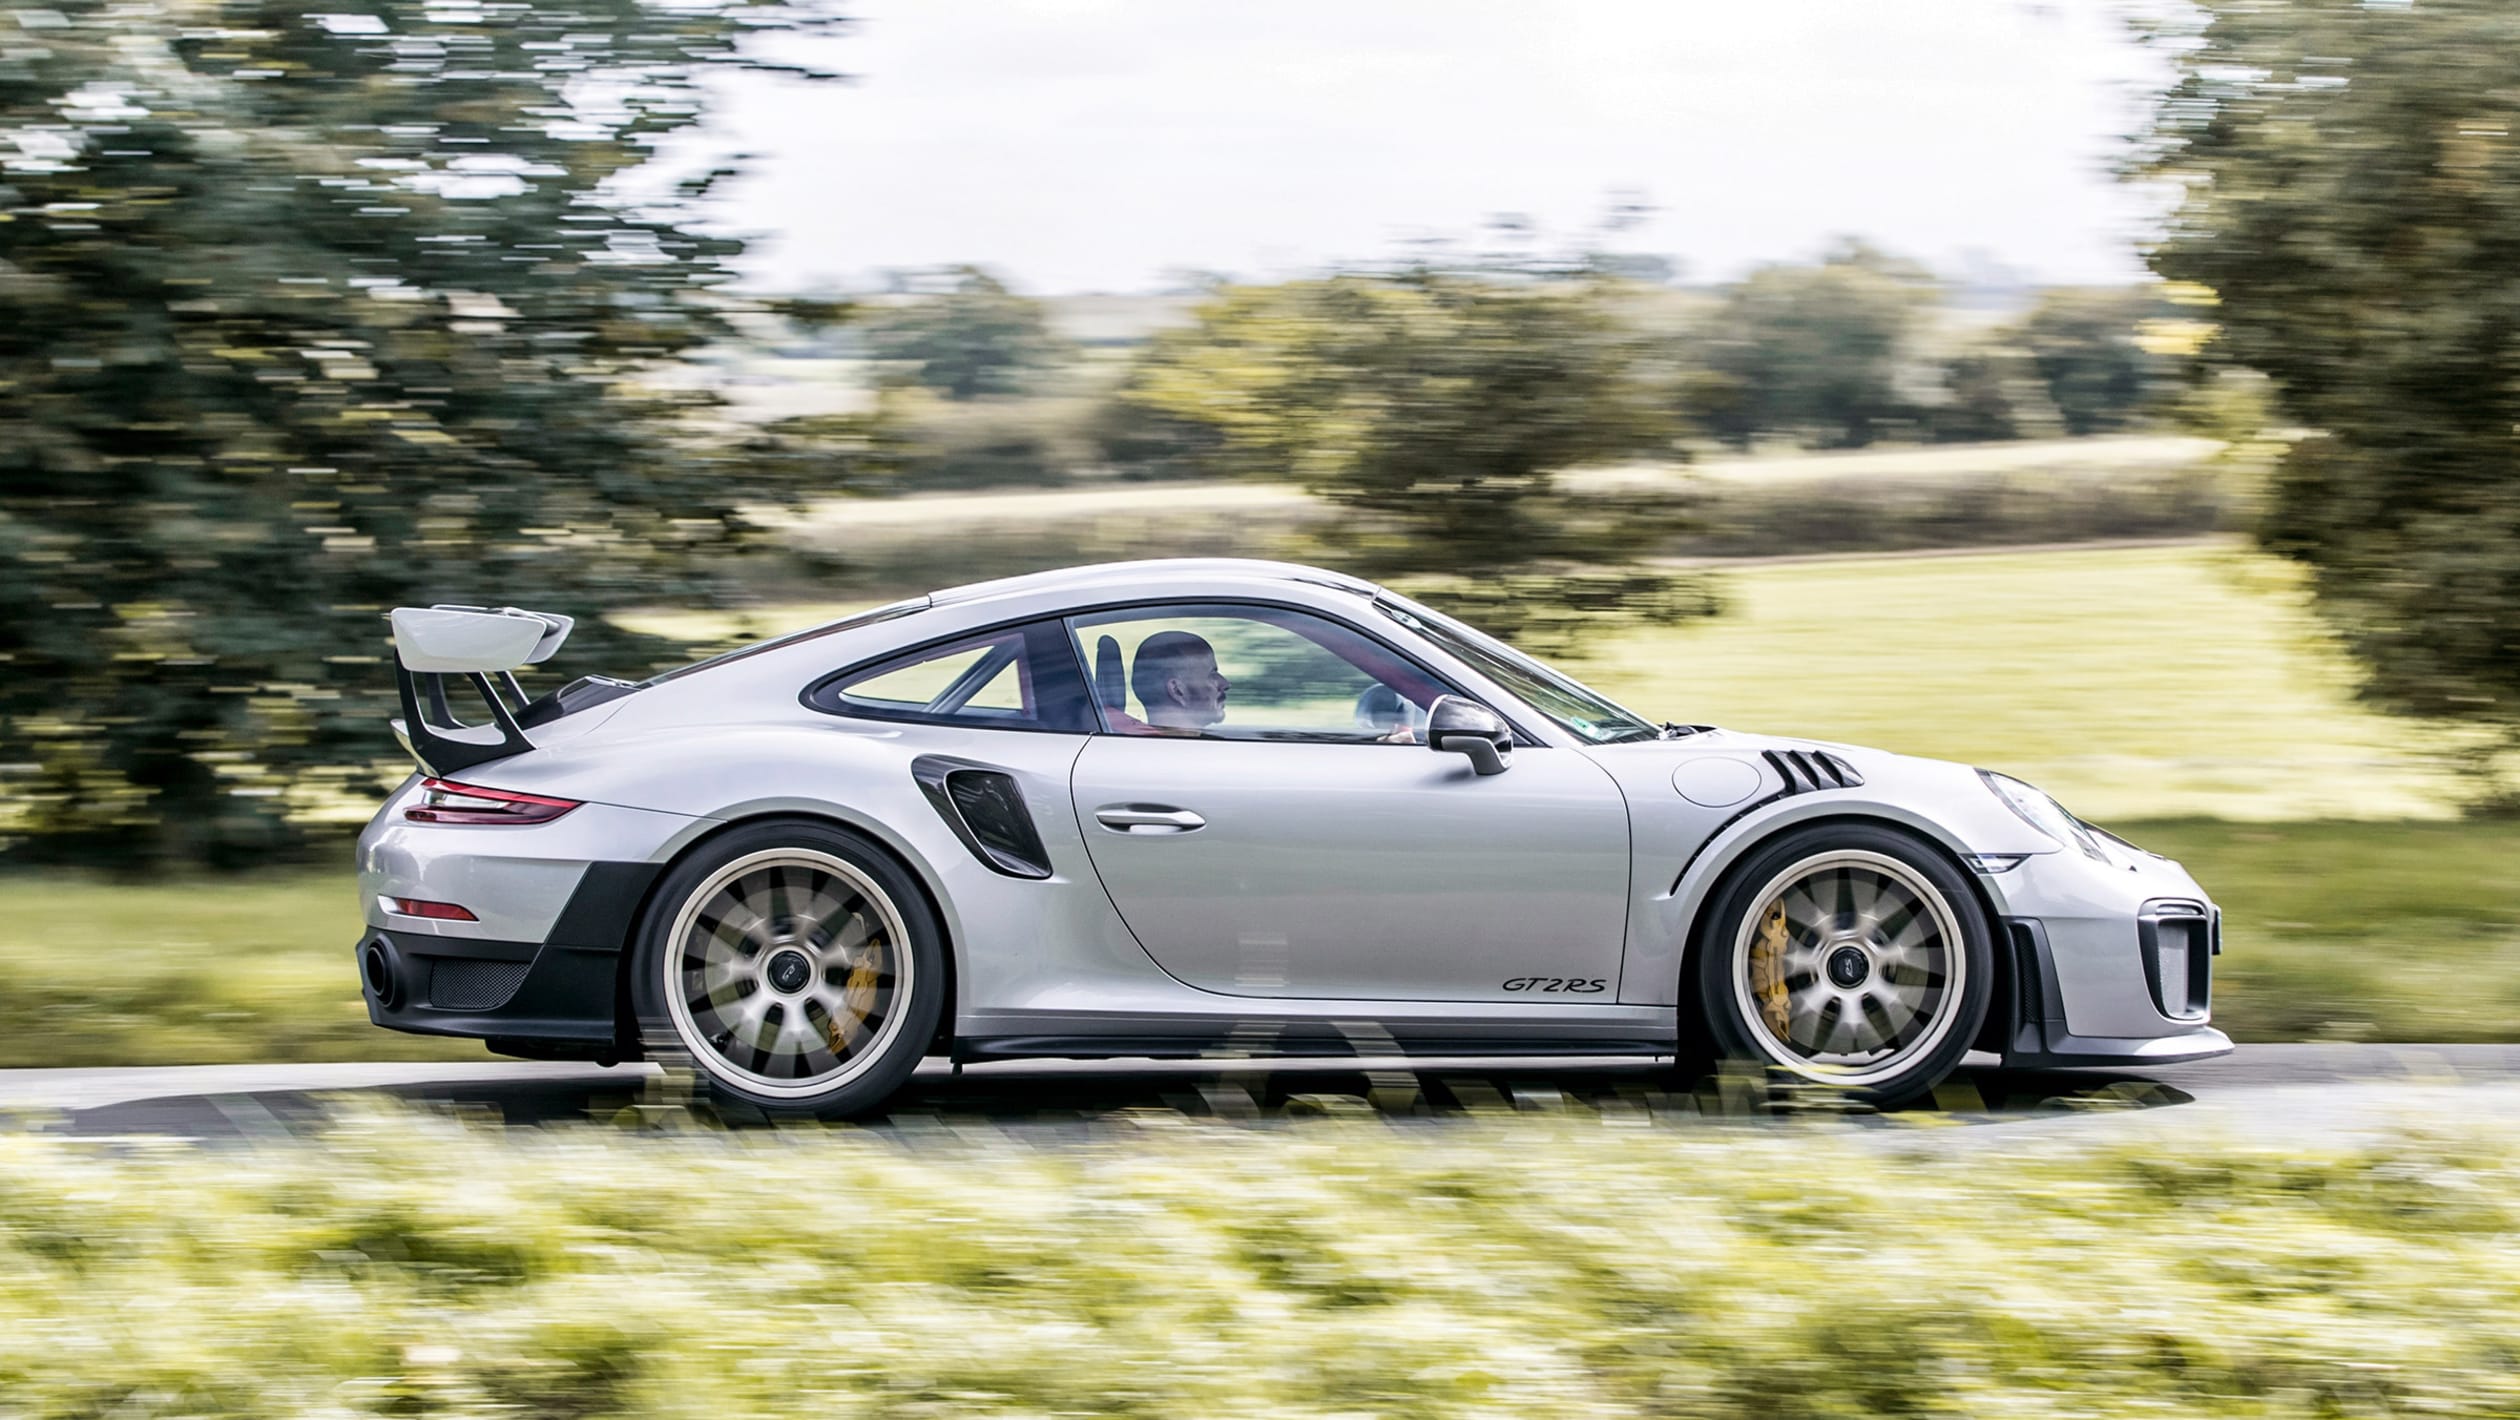 New Porsche 911 Gt2 Rs Review Pictures Evo